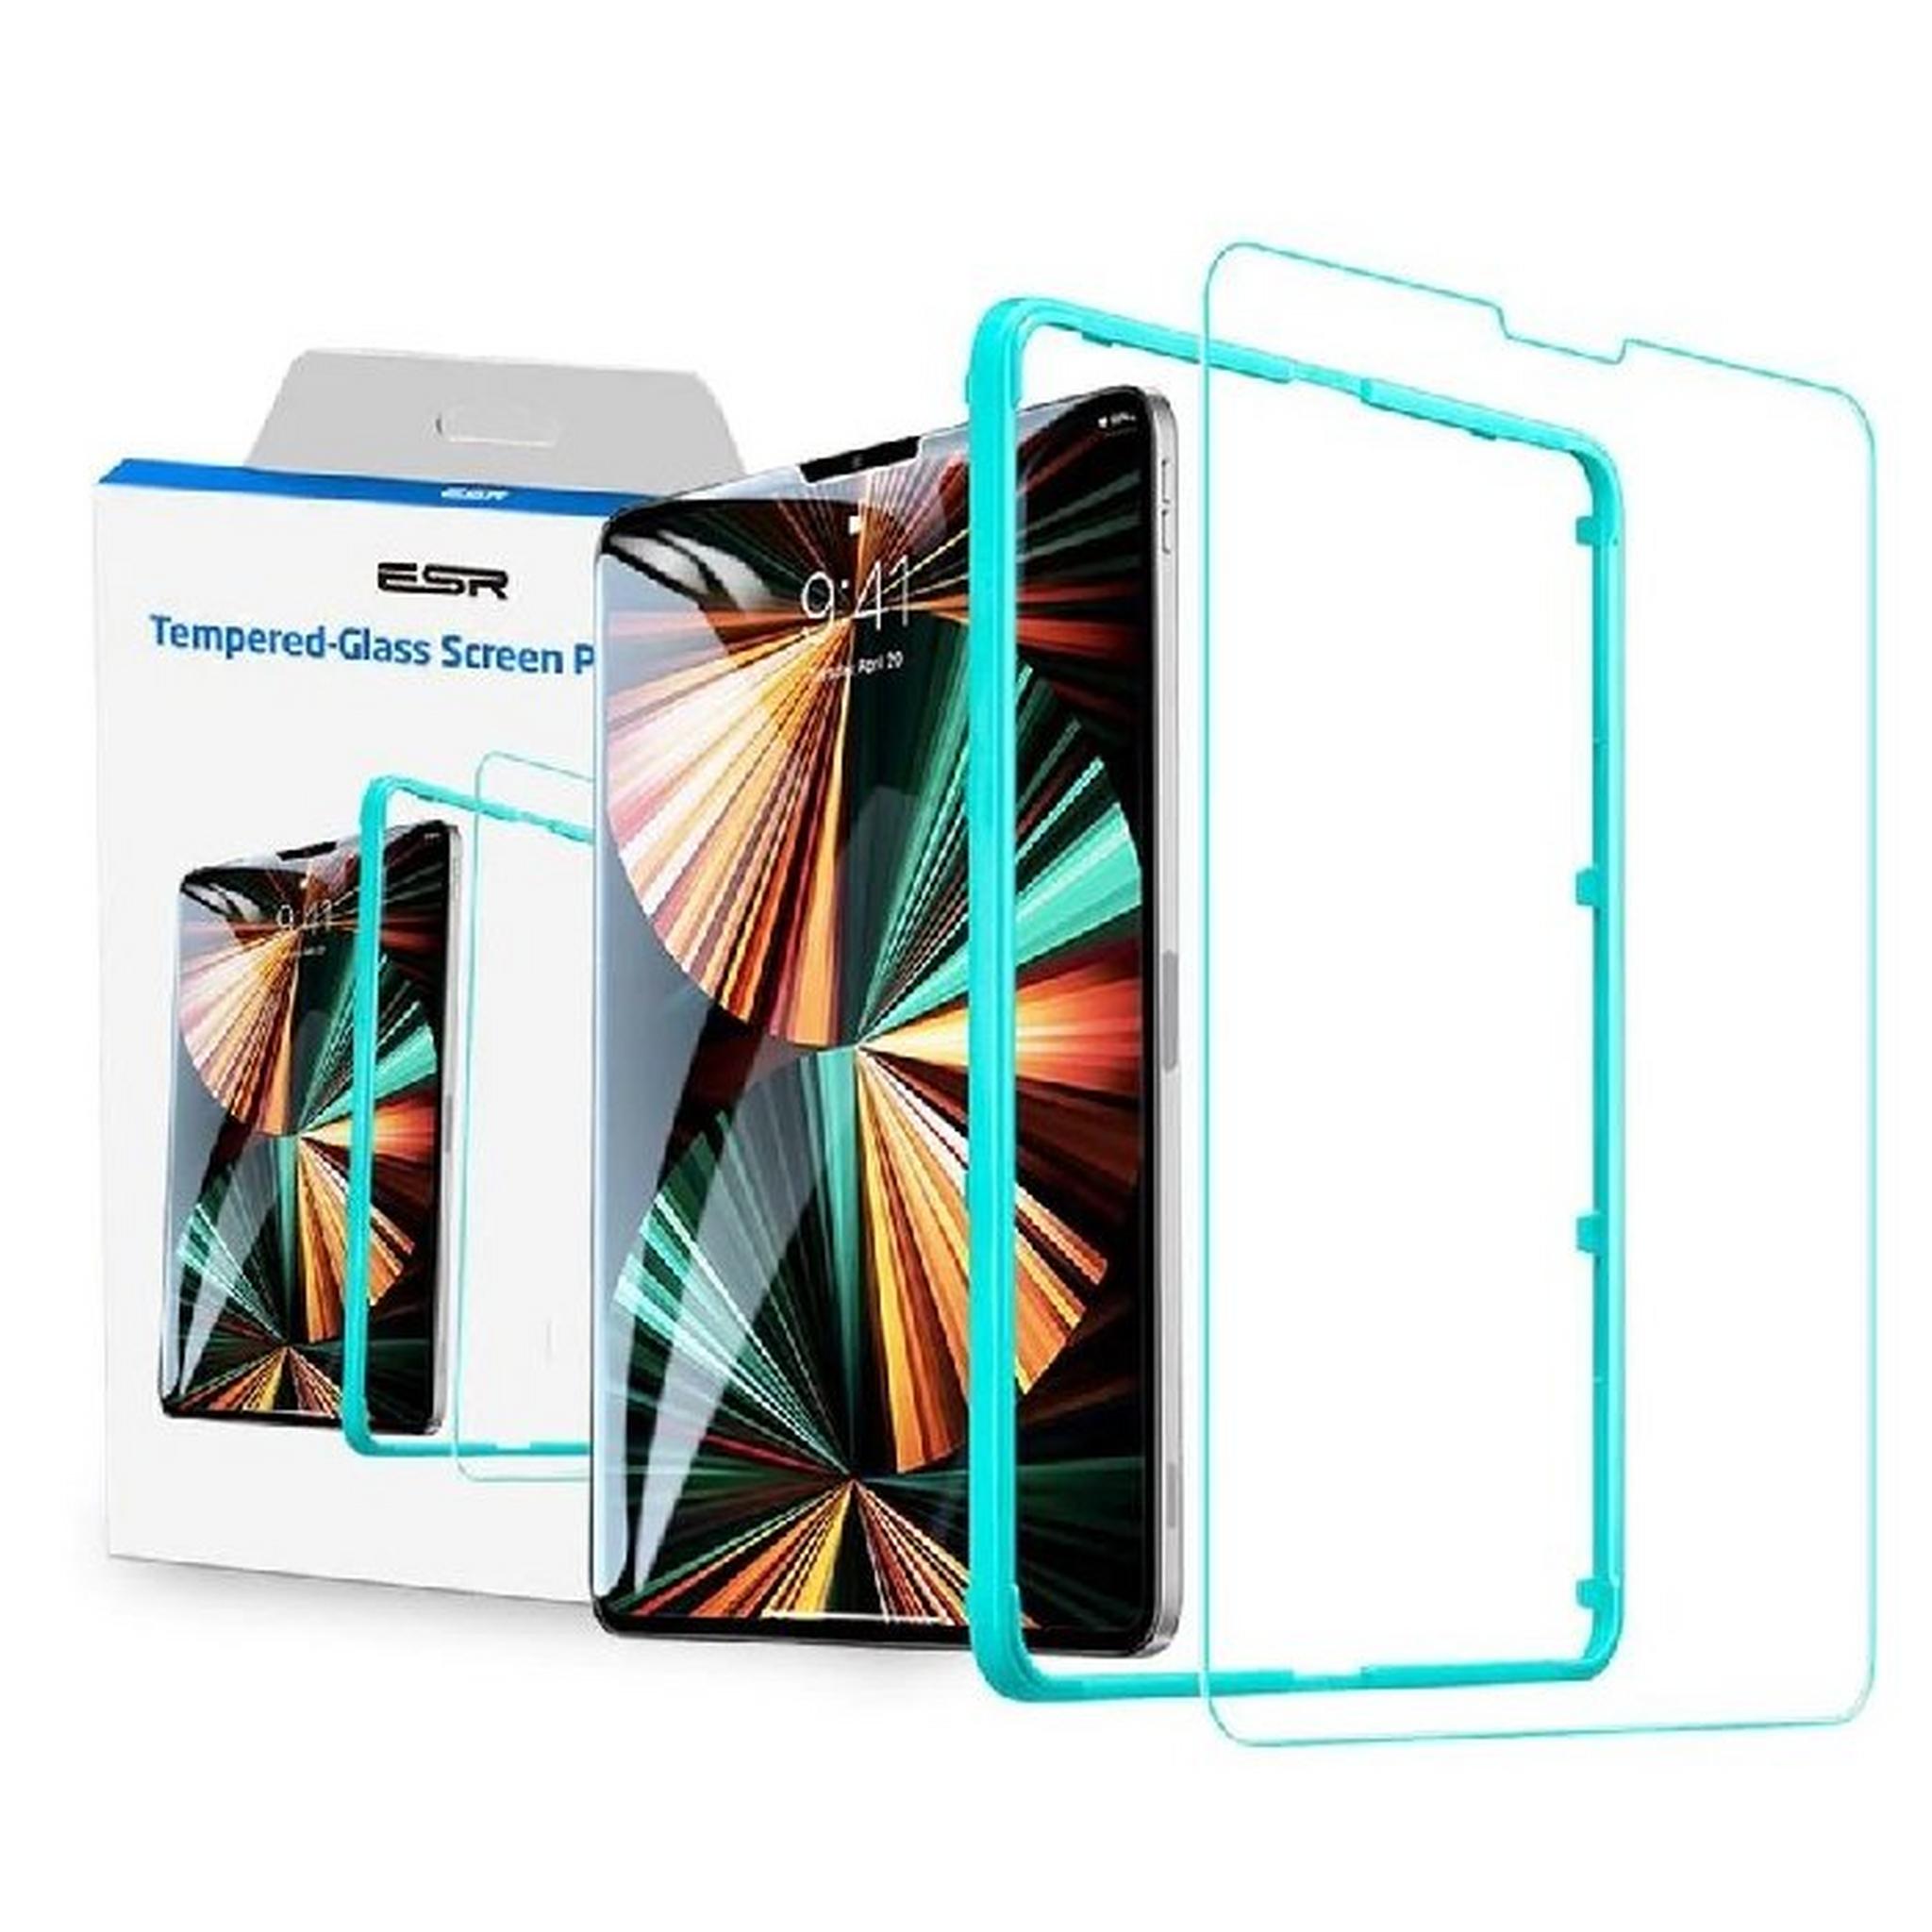 ESR Screen Protector for iPad Pro 12.9 Inch, Tempered-Glass, 2 Pack - Clear